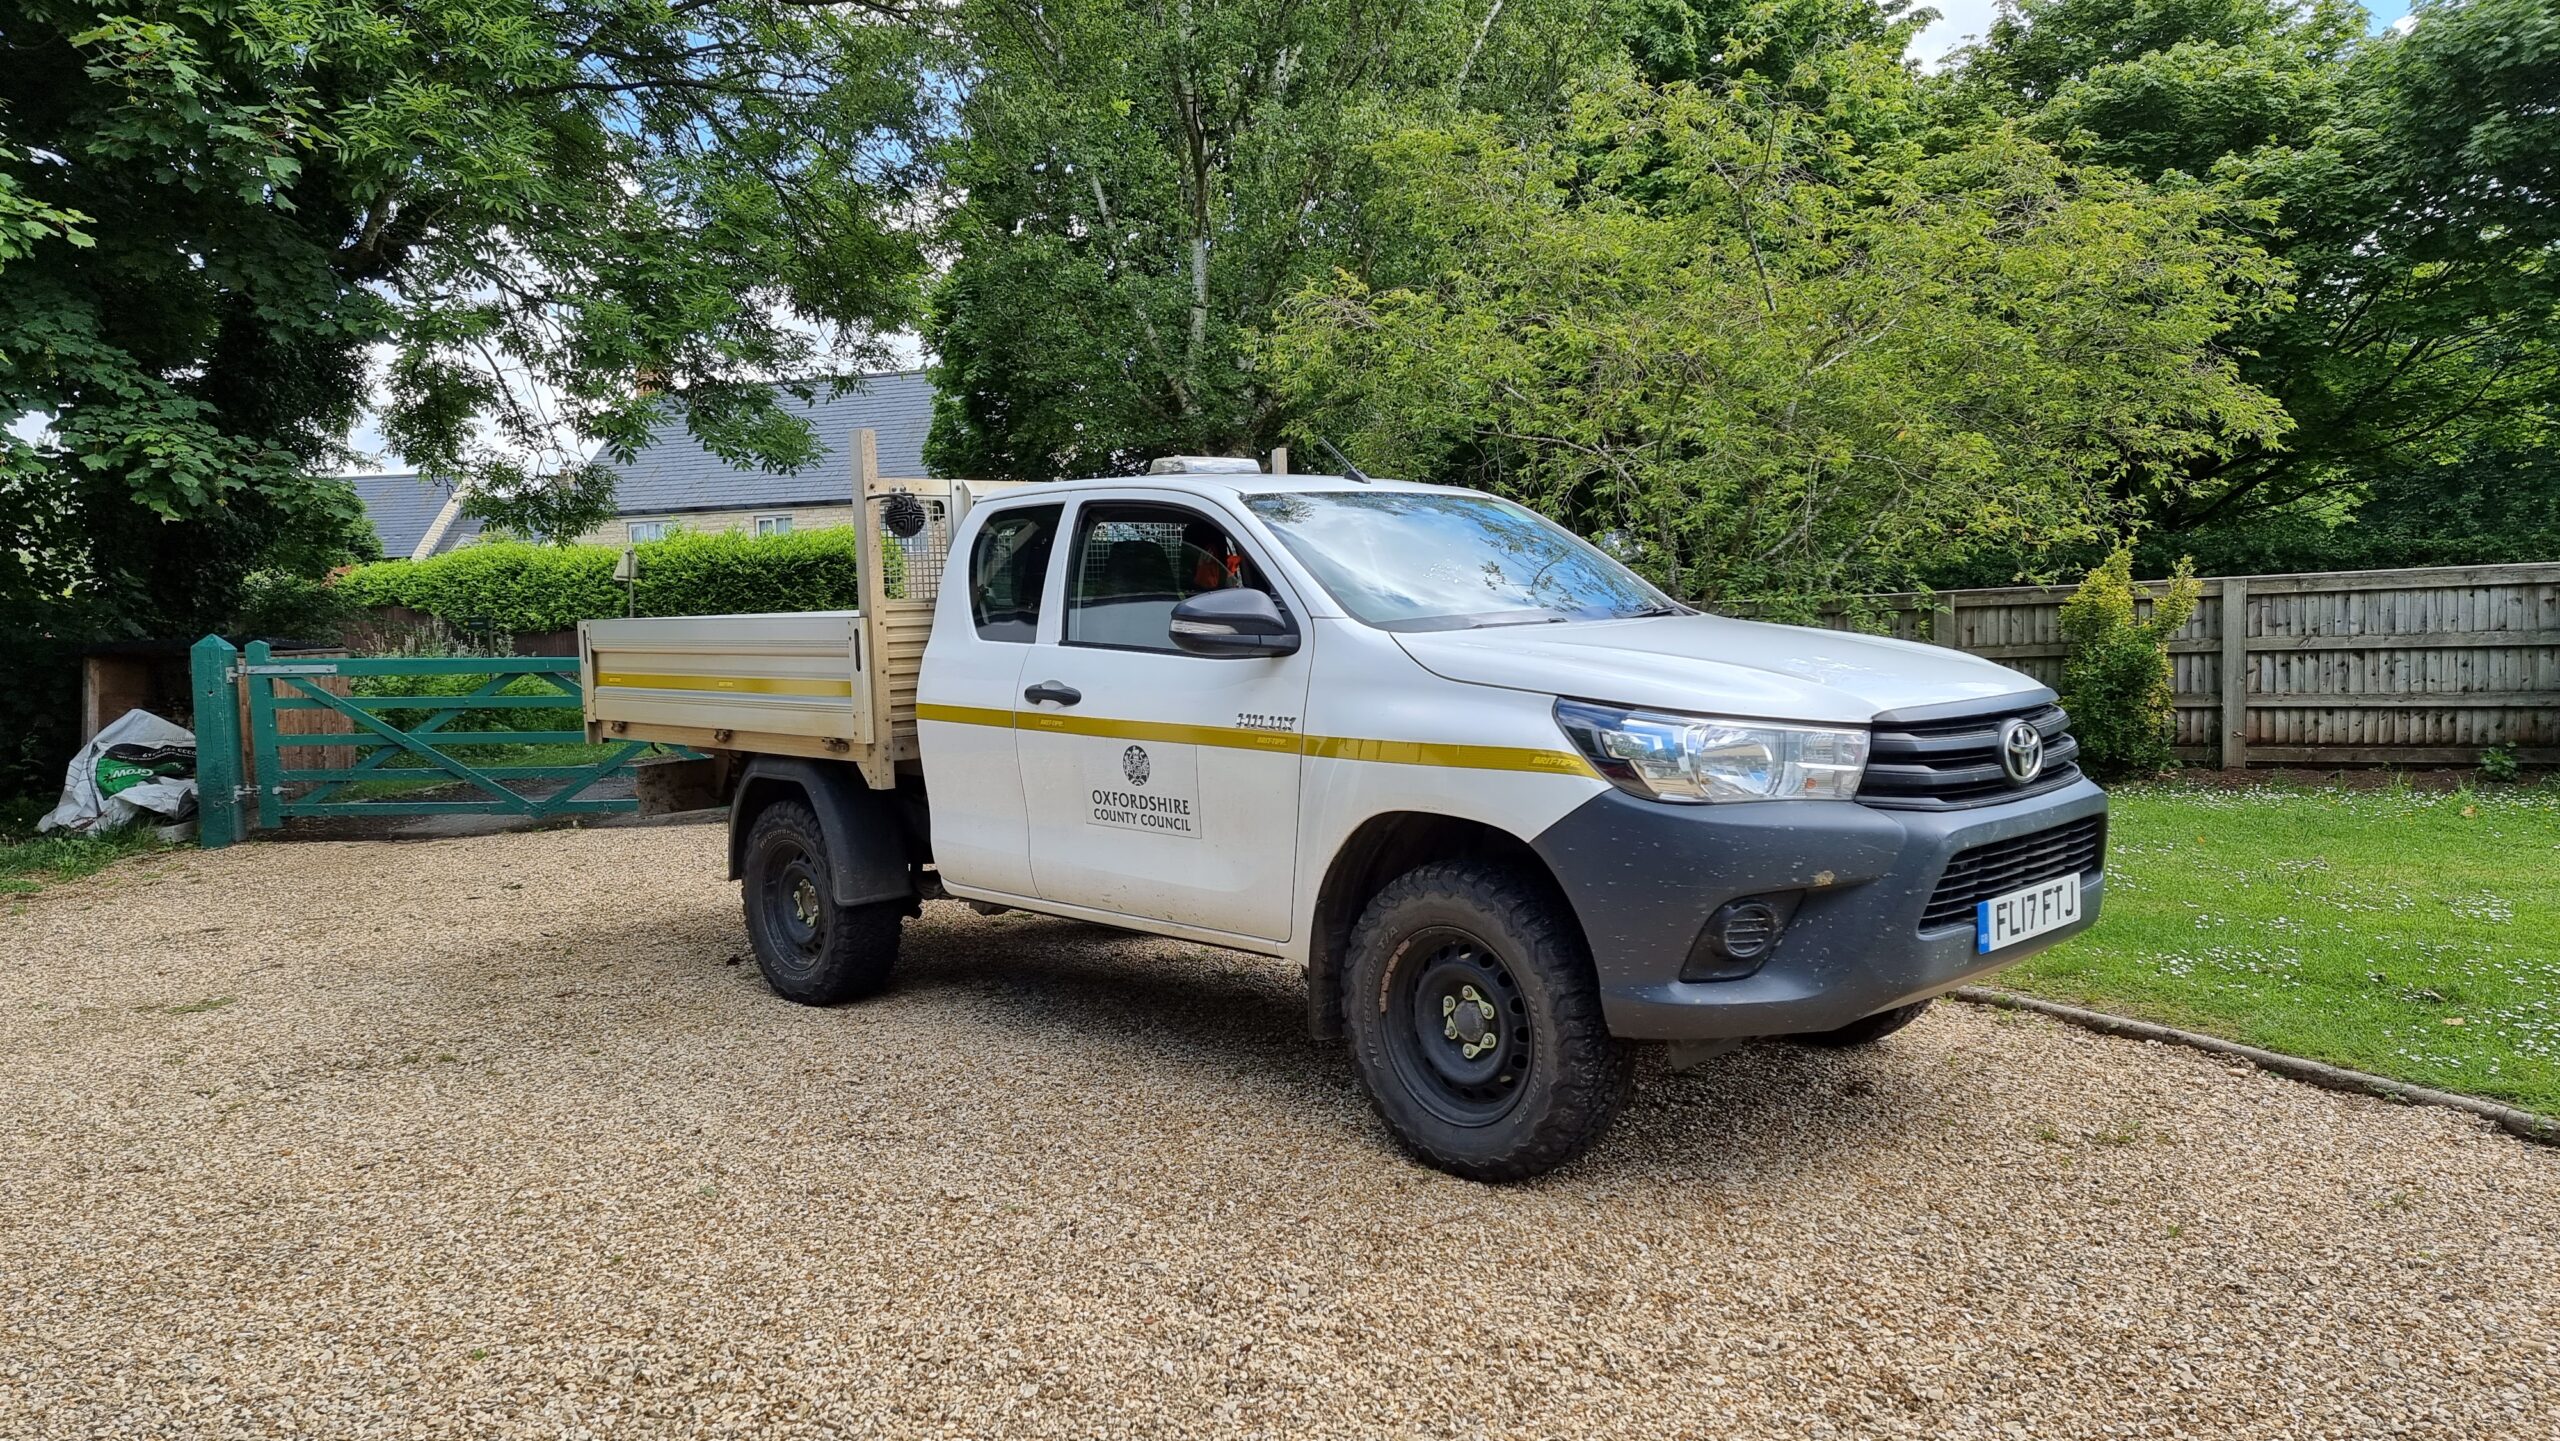 A rugged white flatbed van with a yellow stripe and the logo of Oxfordshire County Council sits on a gravel driveway in a garden. The sun glistens off the windscreen and the driver-side window is partially ajar.